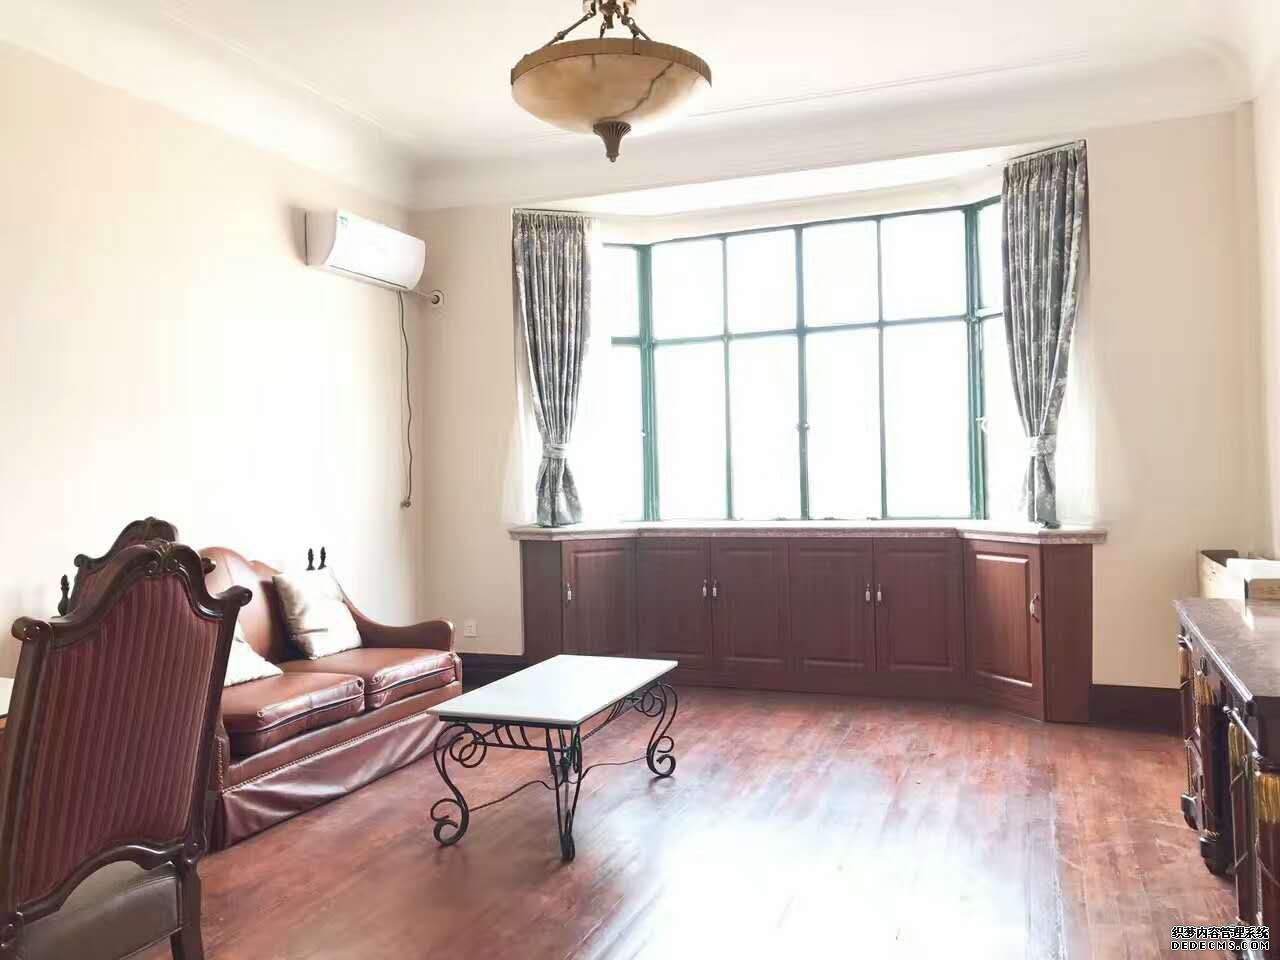  Classy 1.5BR Apartment at Hengshan Road